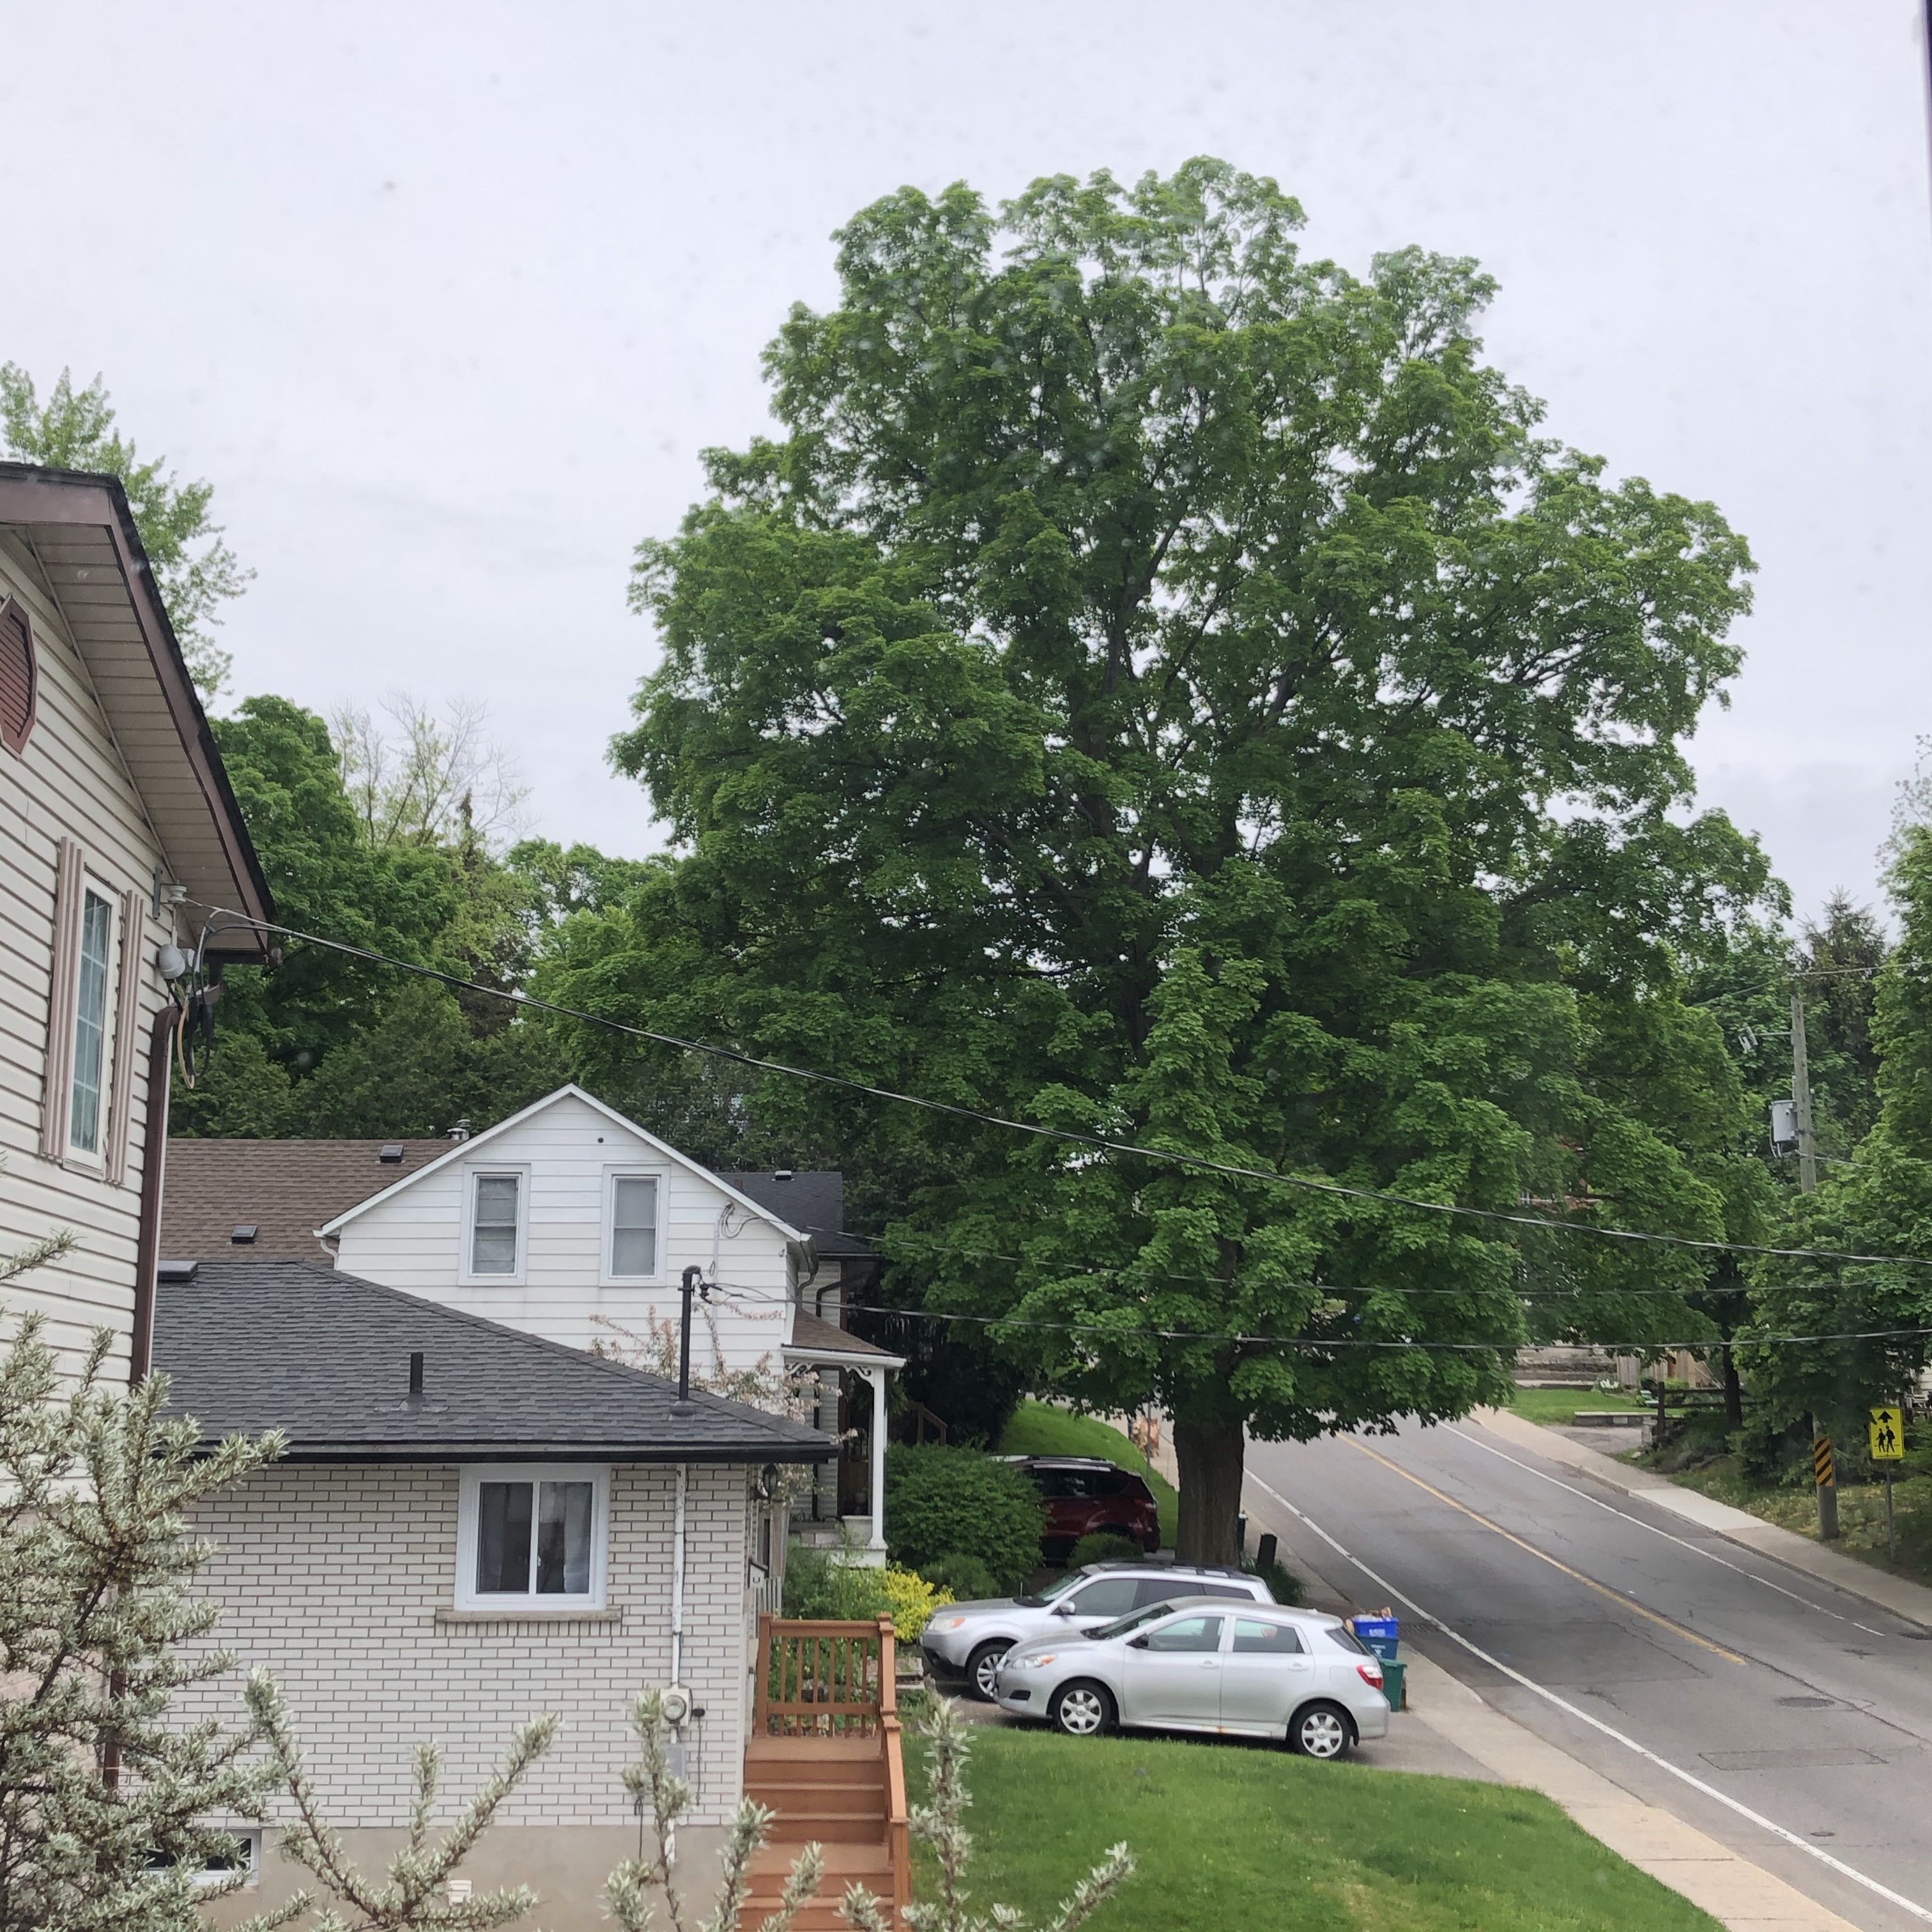 The tree on 28 May 2020